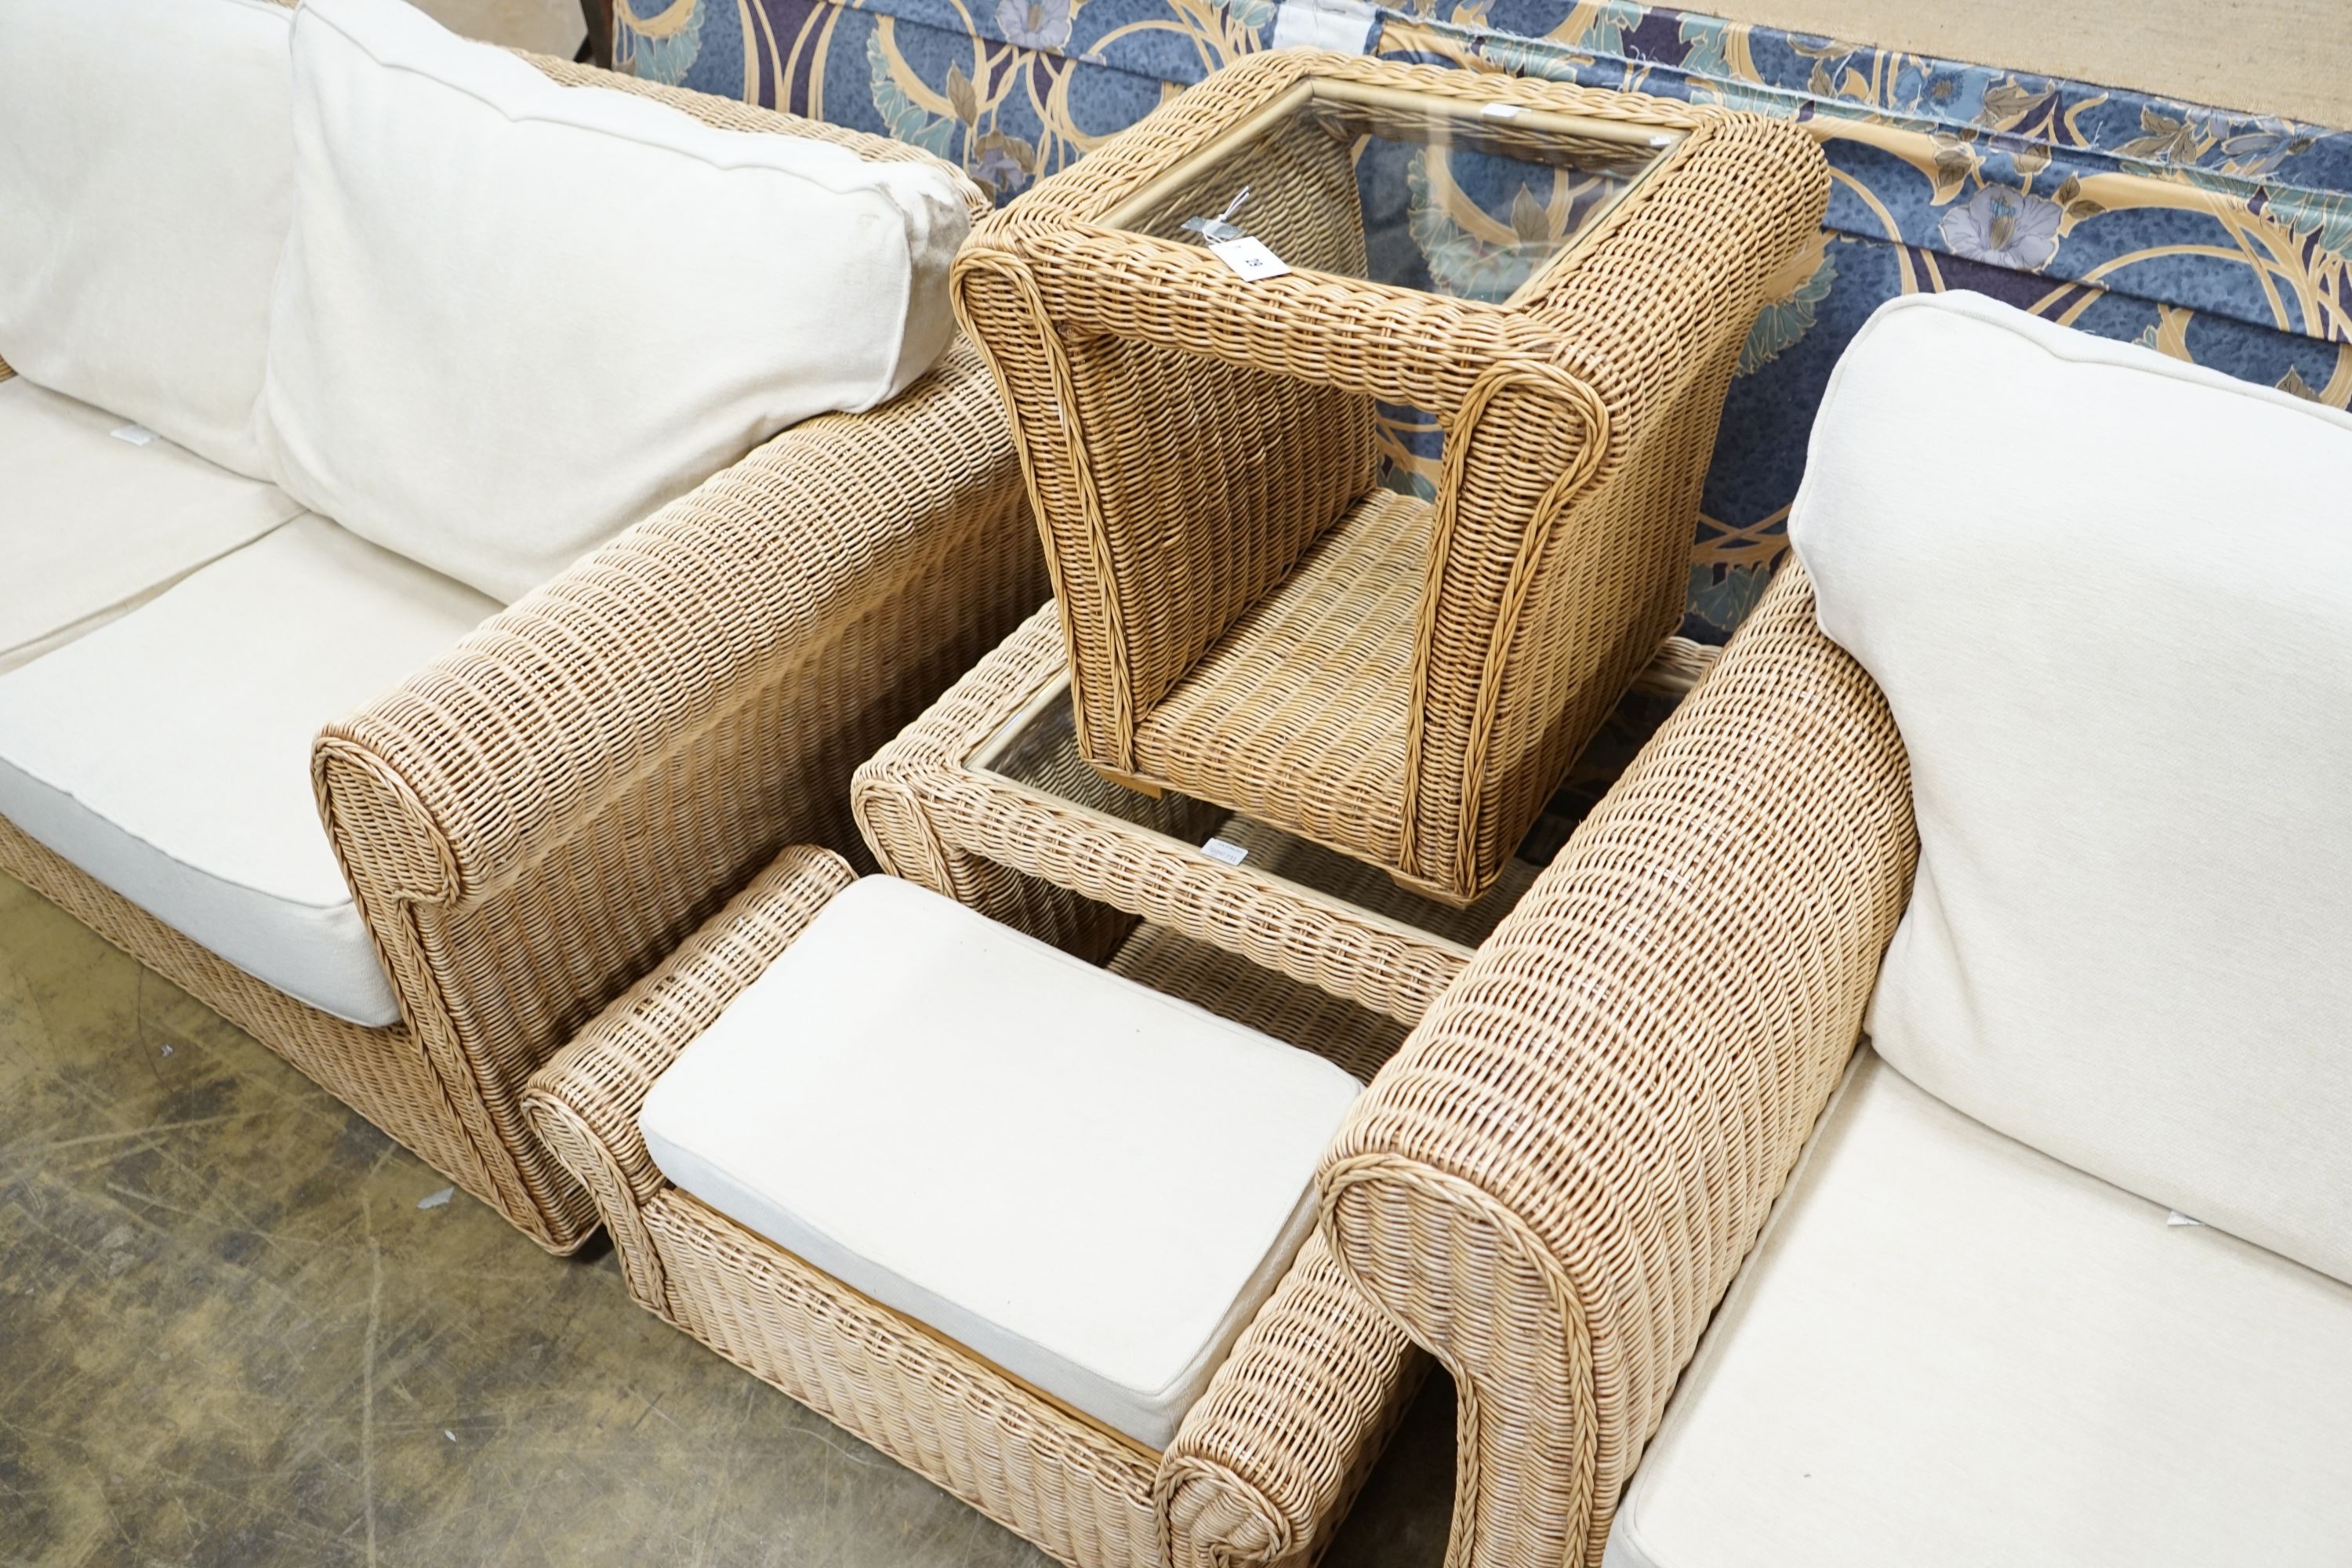 A rattan conservatory suite comprising two seater settee, length 180cm, depth 85cm, height 184cm, armchair, footstool and two glass topped tables